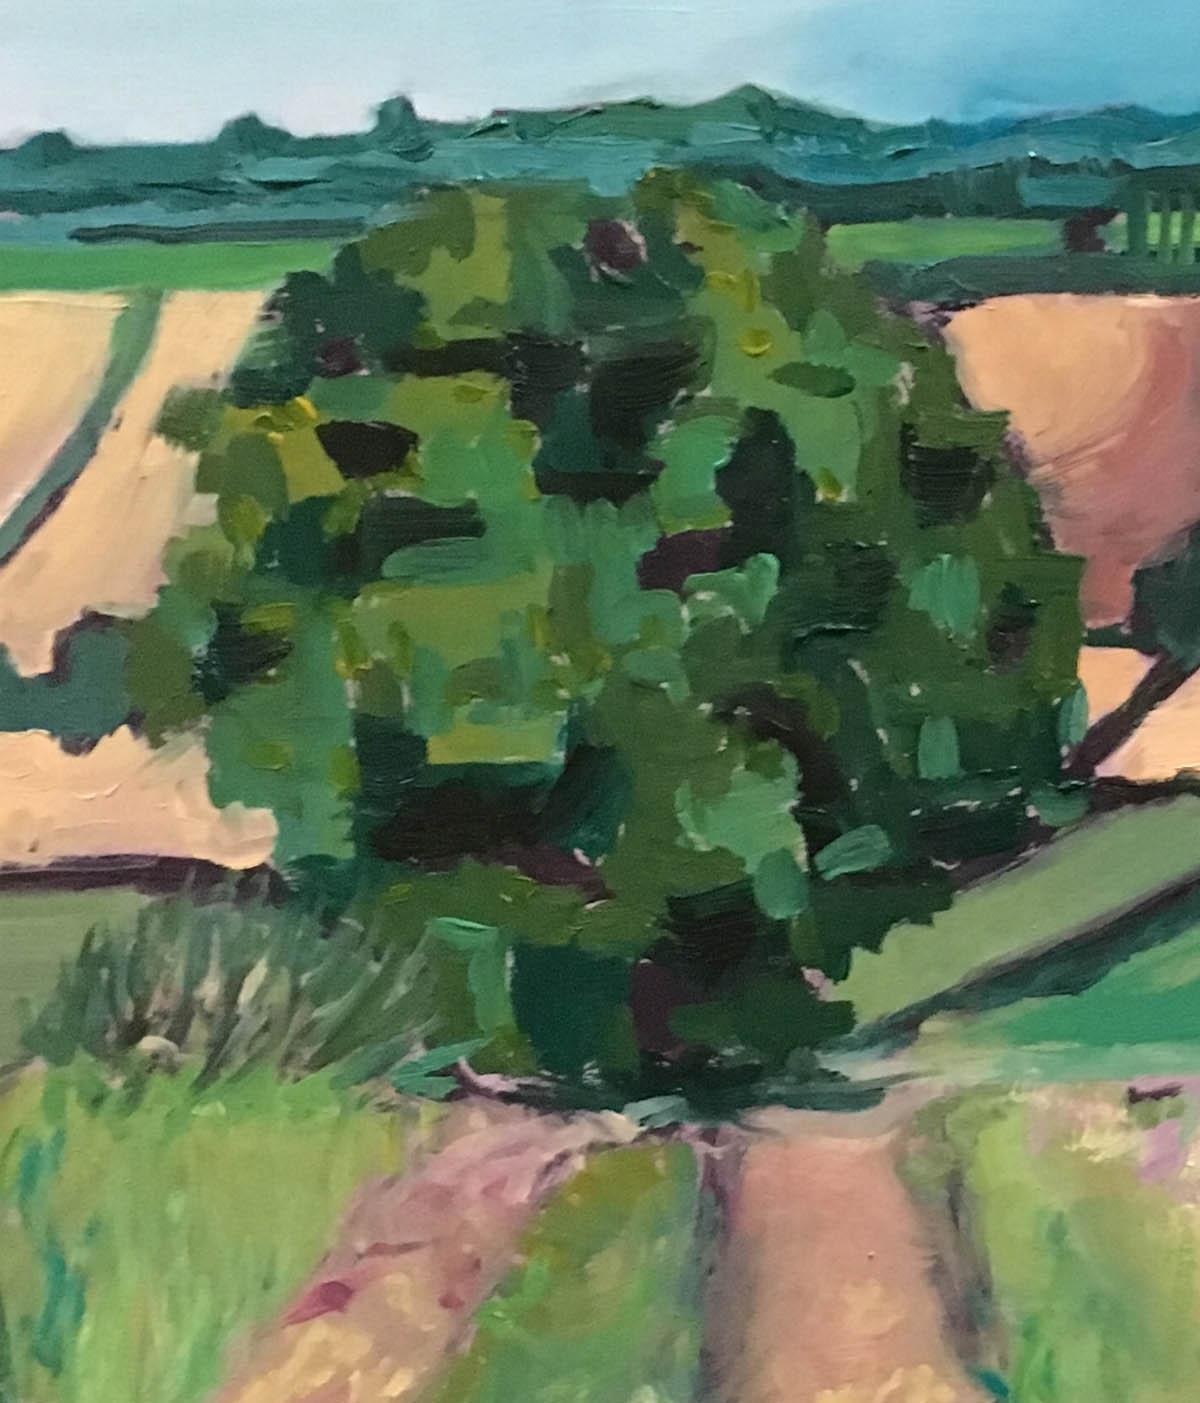 Walking out from Deddington is an original painting by Eleanor Woolley.
I am Always looking for beautiful views and this one struck me. Particularly the lovely dirt track leading down the small valley to the beautiful pale yellow fields in the